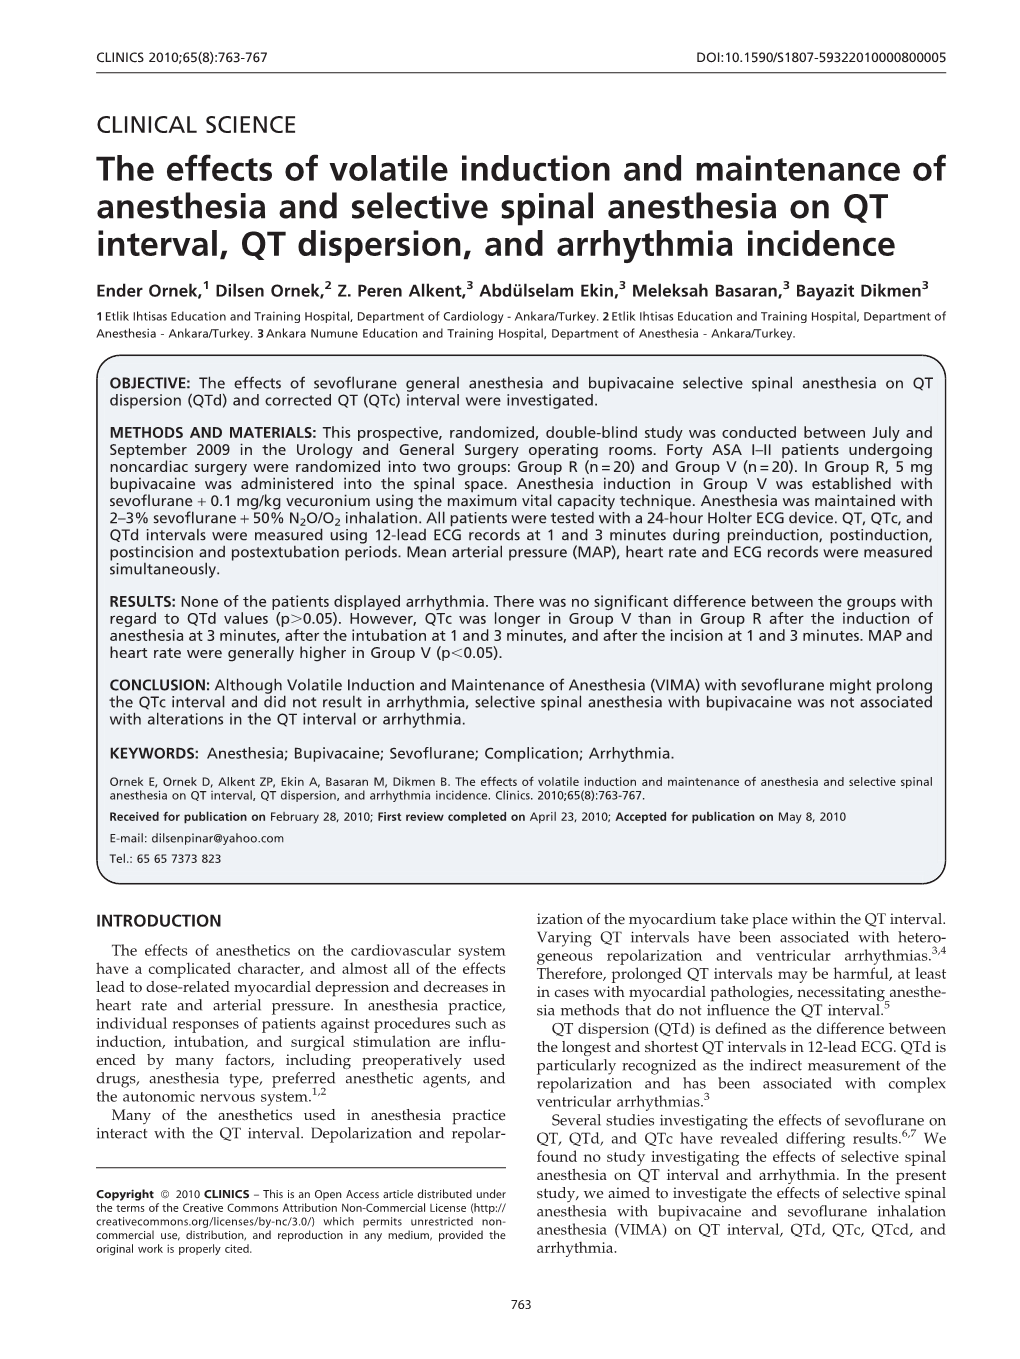 The Effects of Volatile Induction and Maintenance of Anesthesia and Selective Spinal Anesthesia on QT Interval, QT Dispersion, and Arrhythmia Incidence